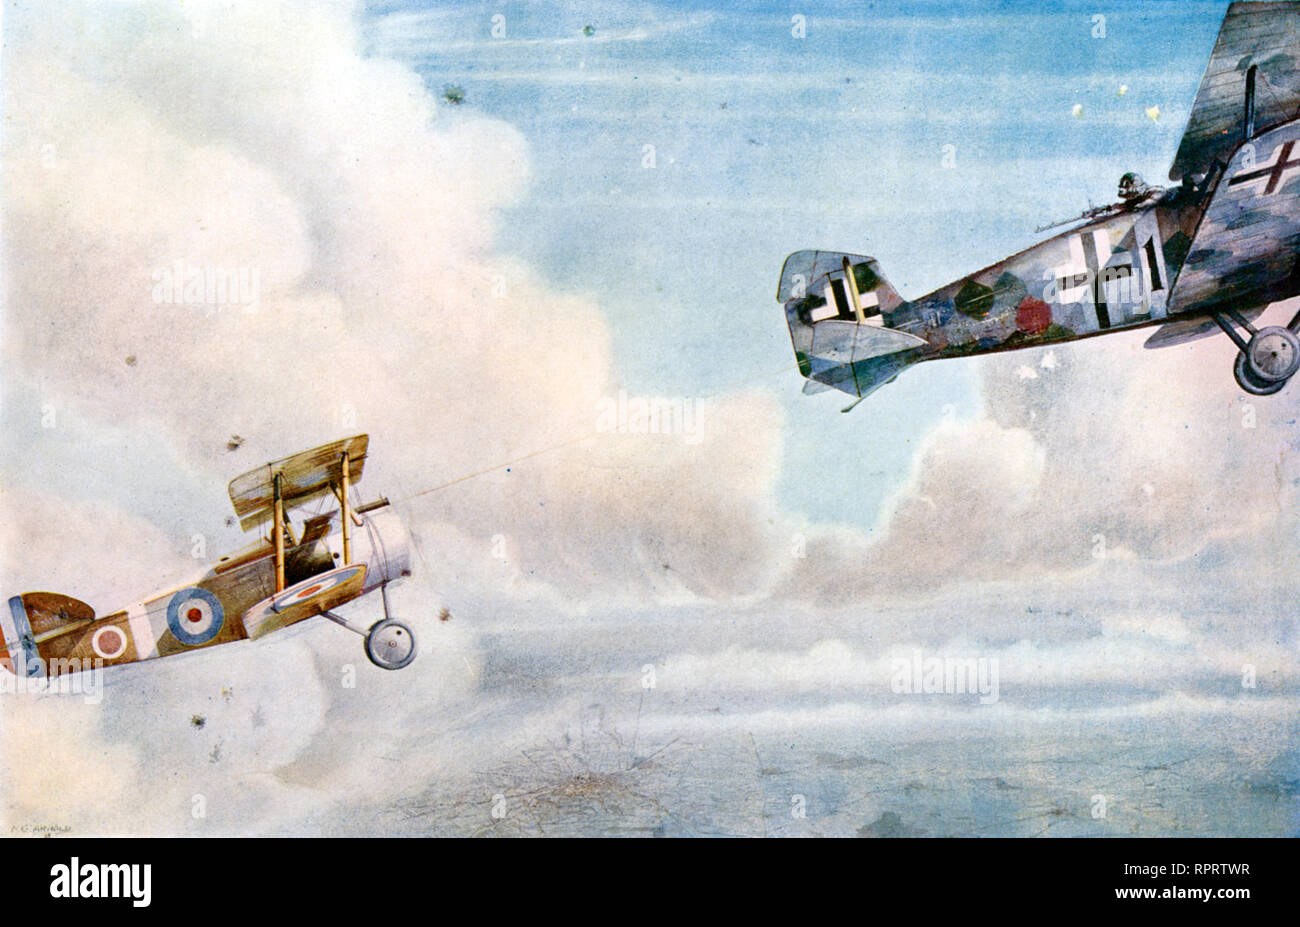 The Blind Spot: British Sopwith Camel and a German Hannover two-seater fighter, c1914. By Norman G. Arnold (1892-1963). Two WWI aircraft engaged in a dog-fight. Stock Photo